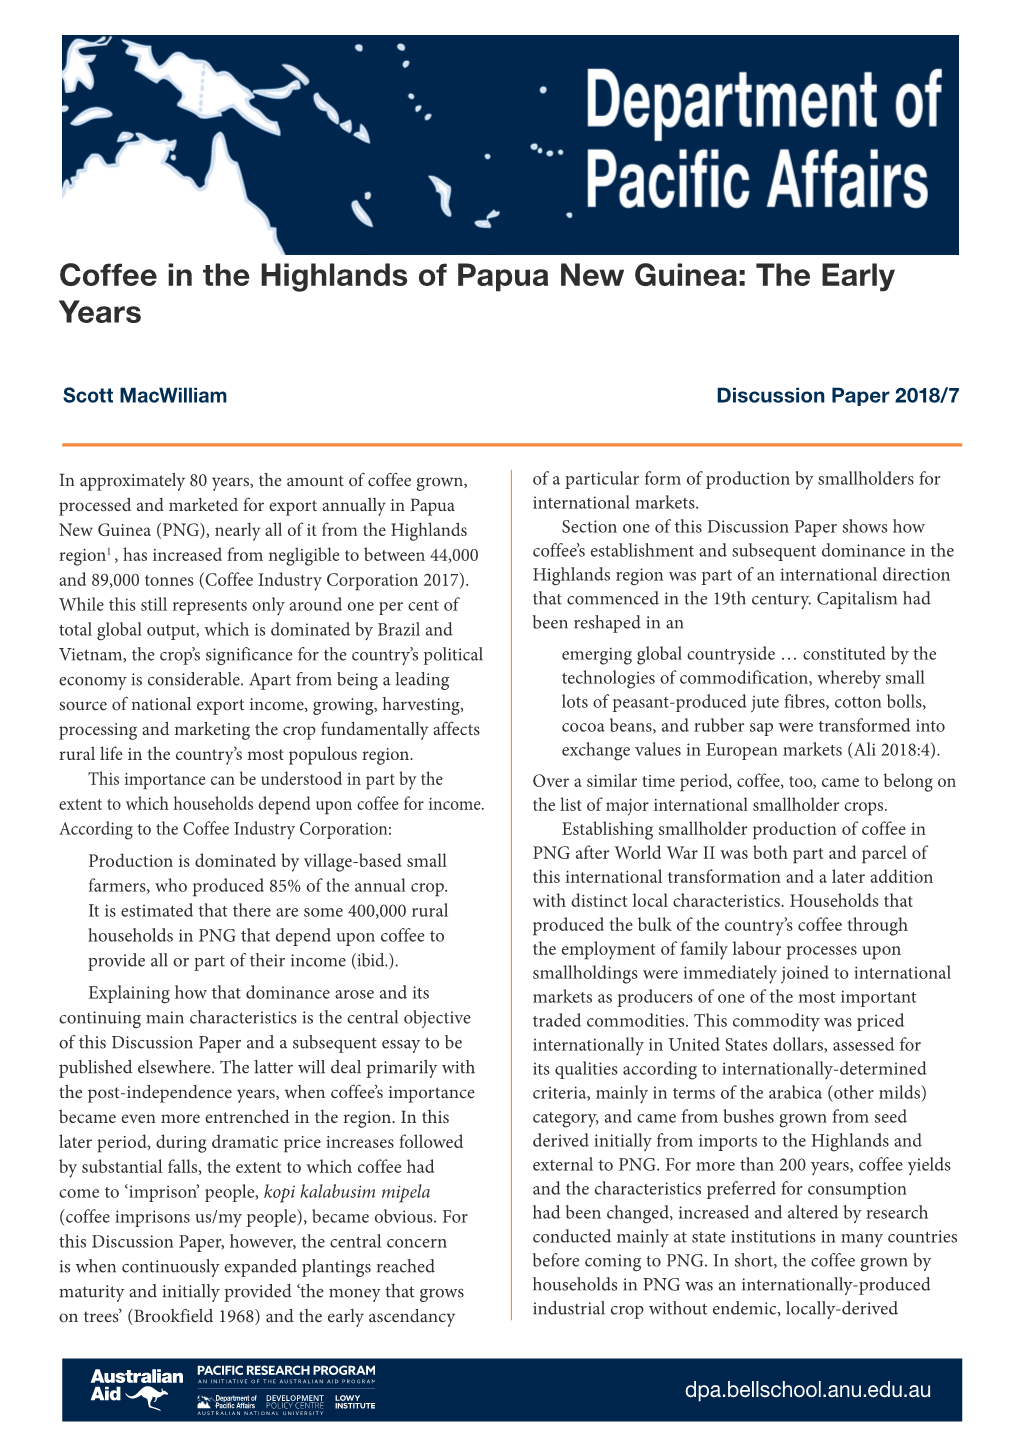 Coffee in the Highlands of Papua New Guinea: the Early Years